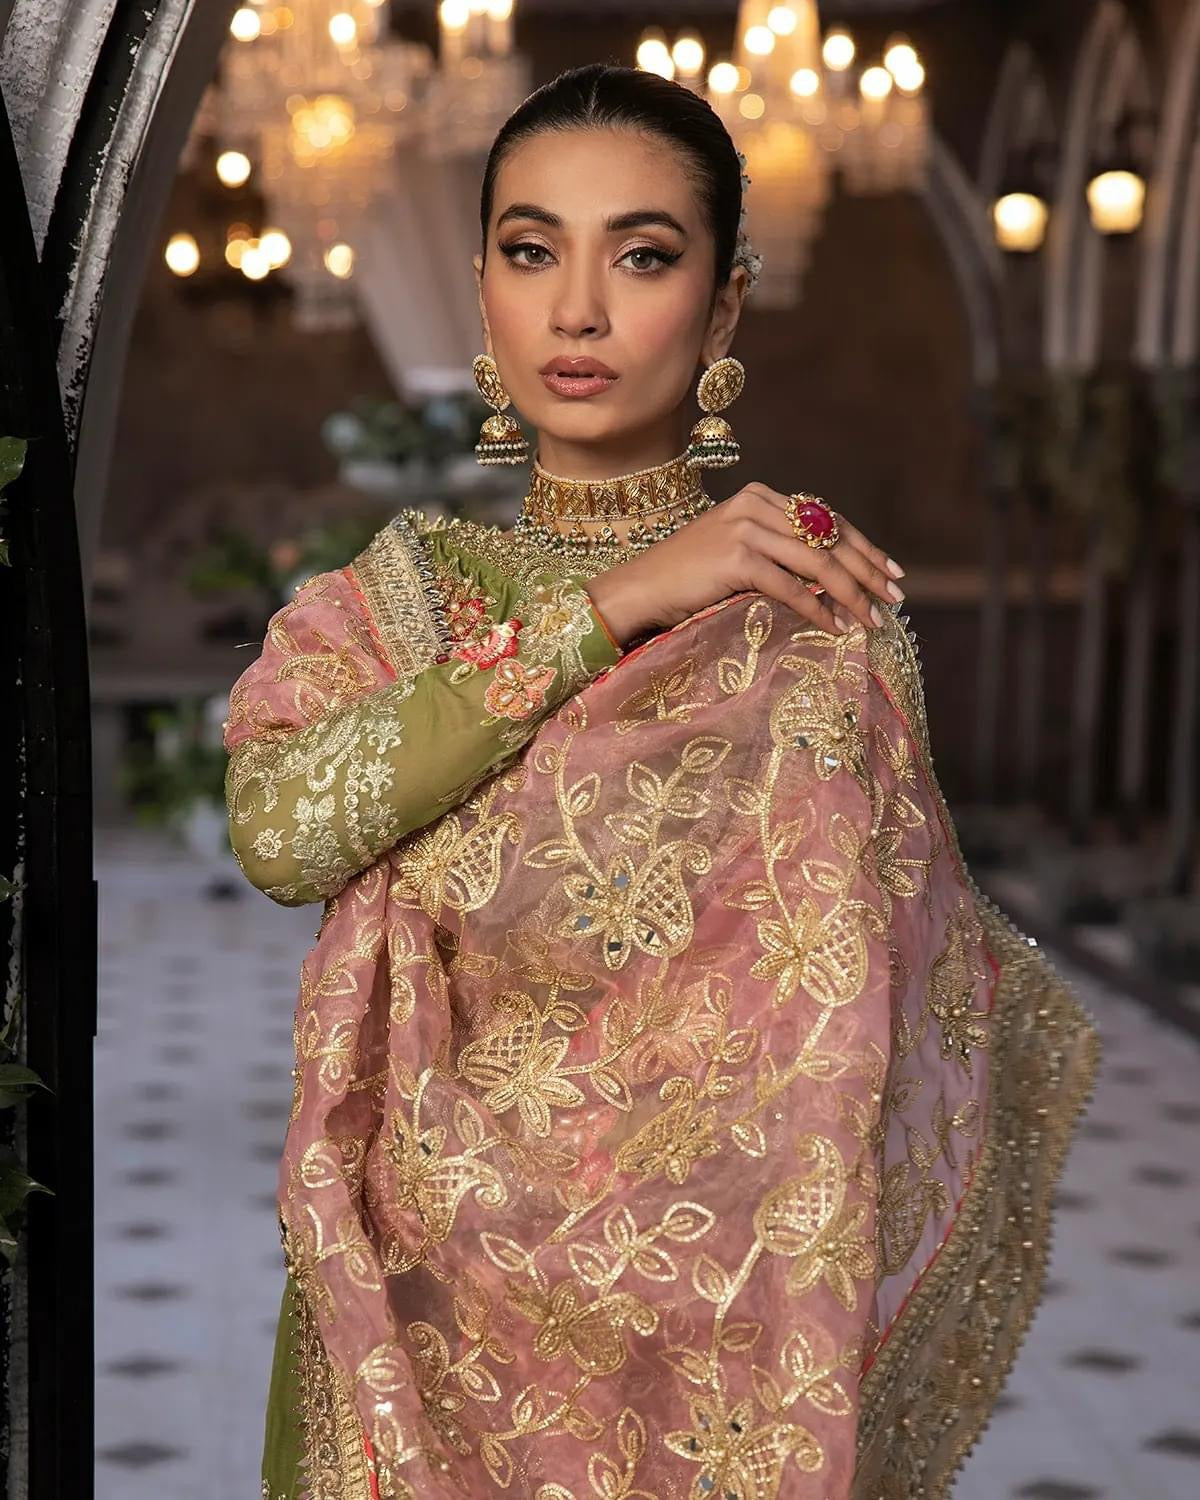 Ally's Chiffon embroidered shirt with embroidered organza dupatta 3 piece